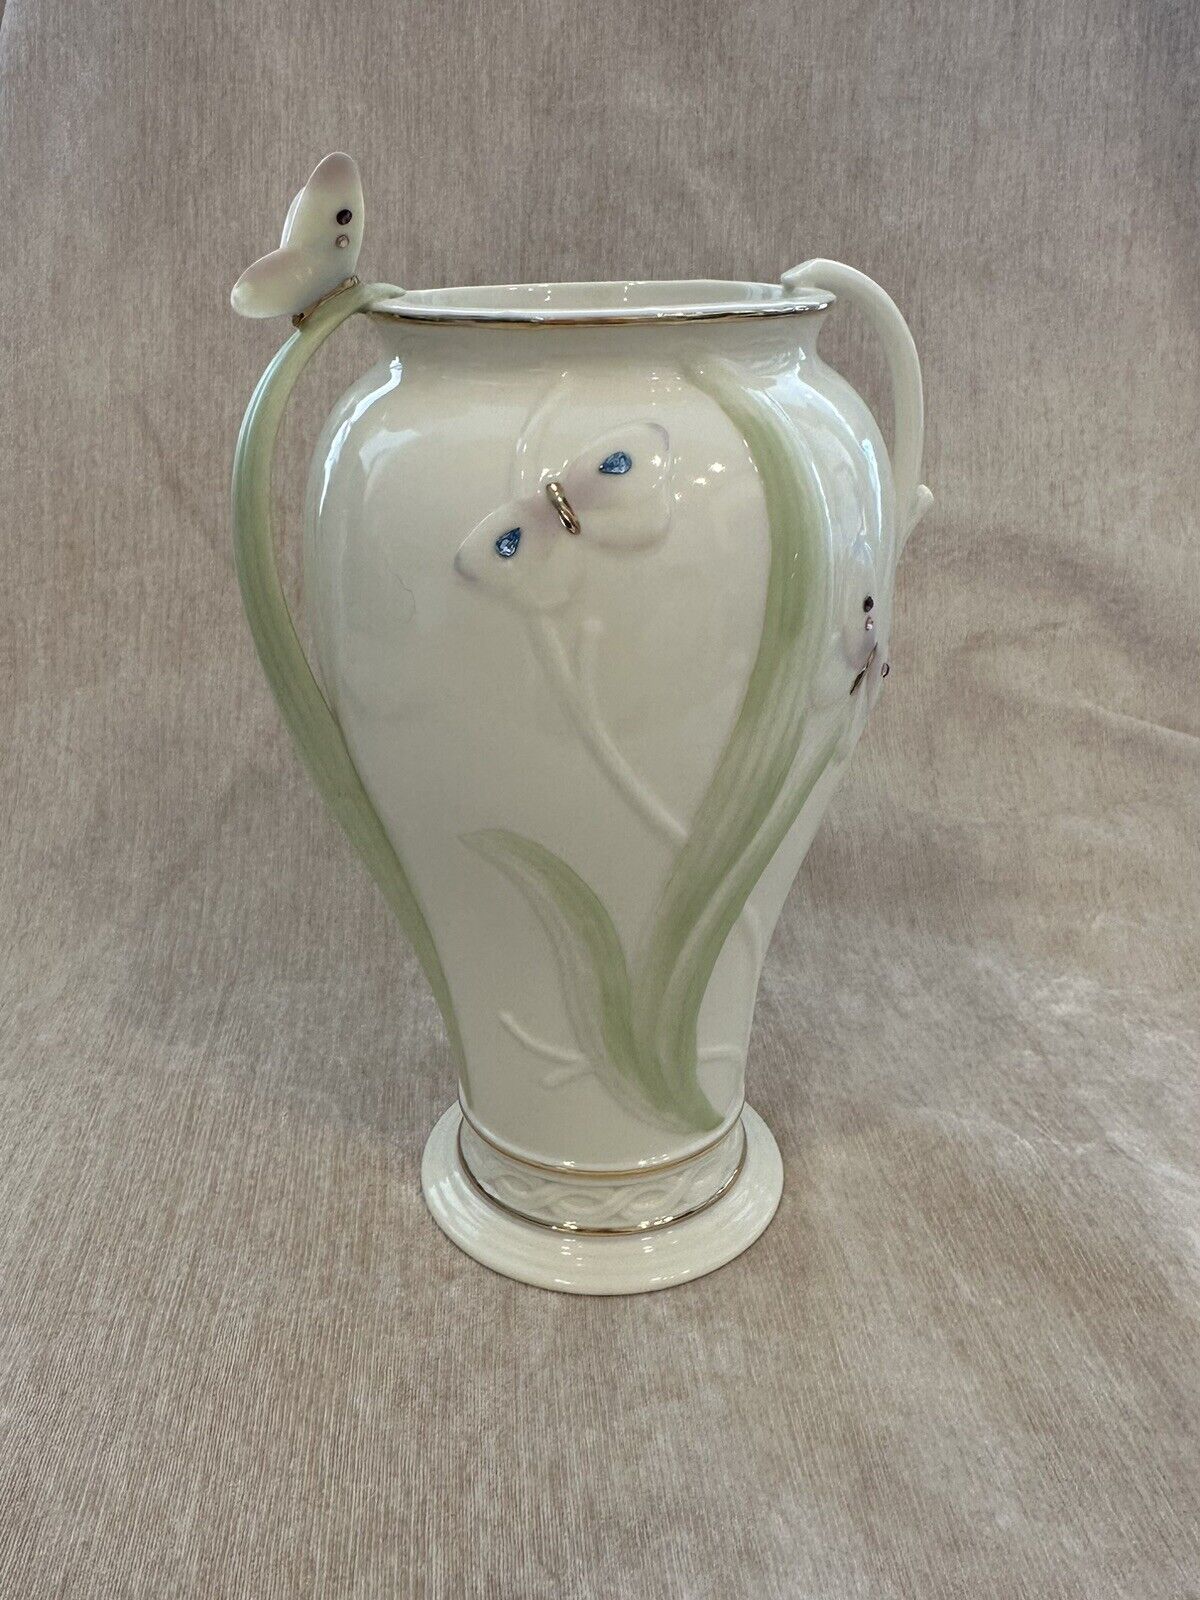 Lenox Jeweled Butterfly Vase Hand-Crafted Gold Trim & Crystals Bone China